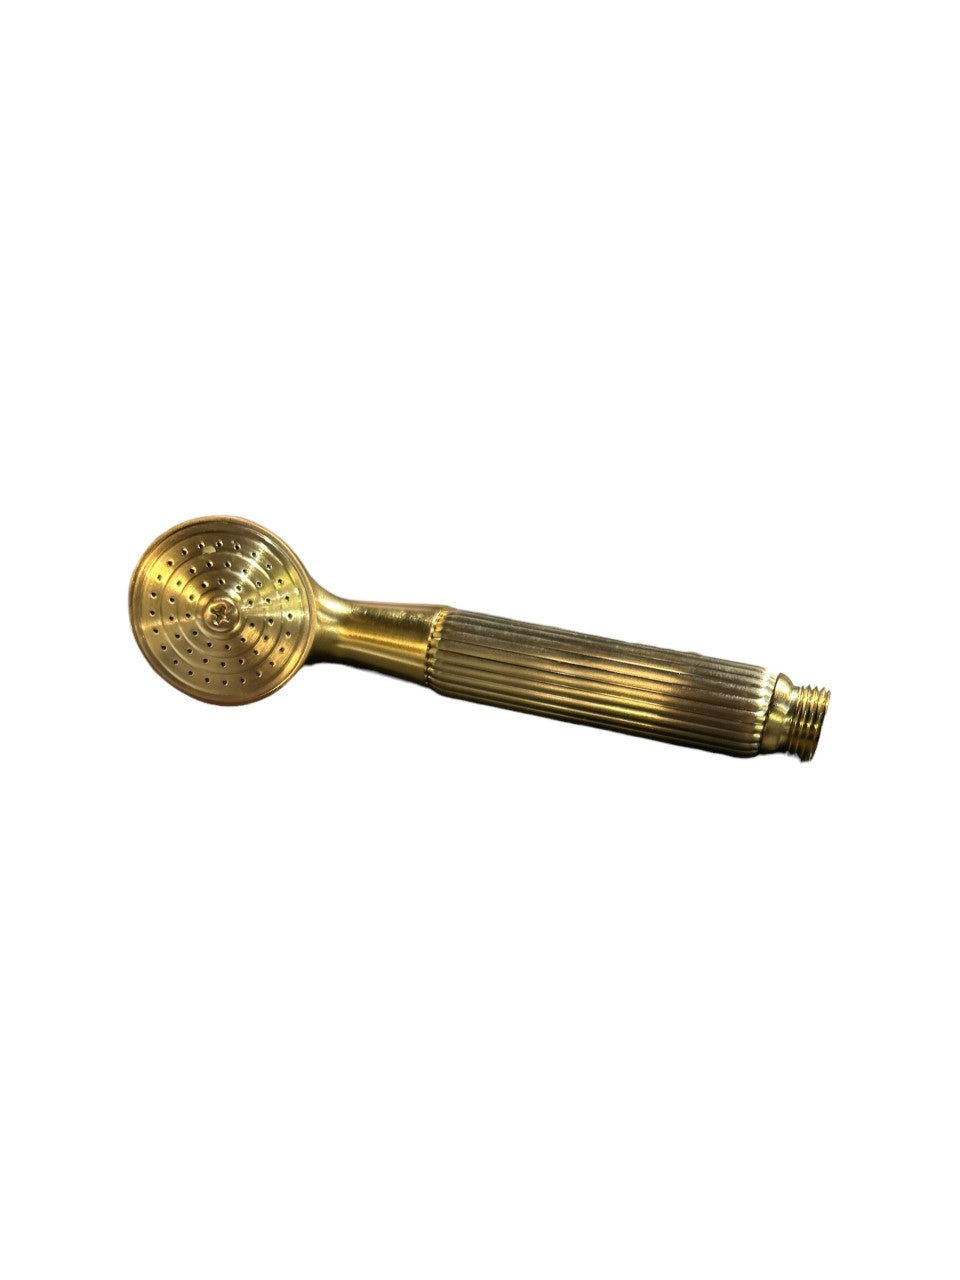 Newport Brass 280/10 Solid Brass Single Function Handshower with Grooved  Brass Handle Less Hose, Satin Bronze, New in Box